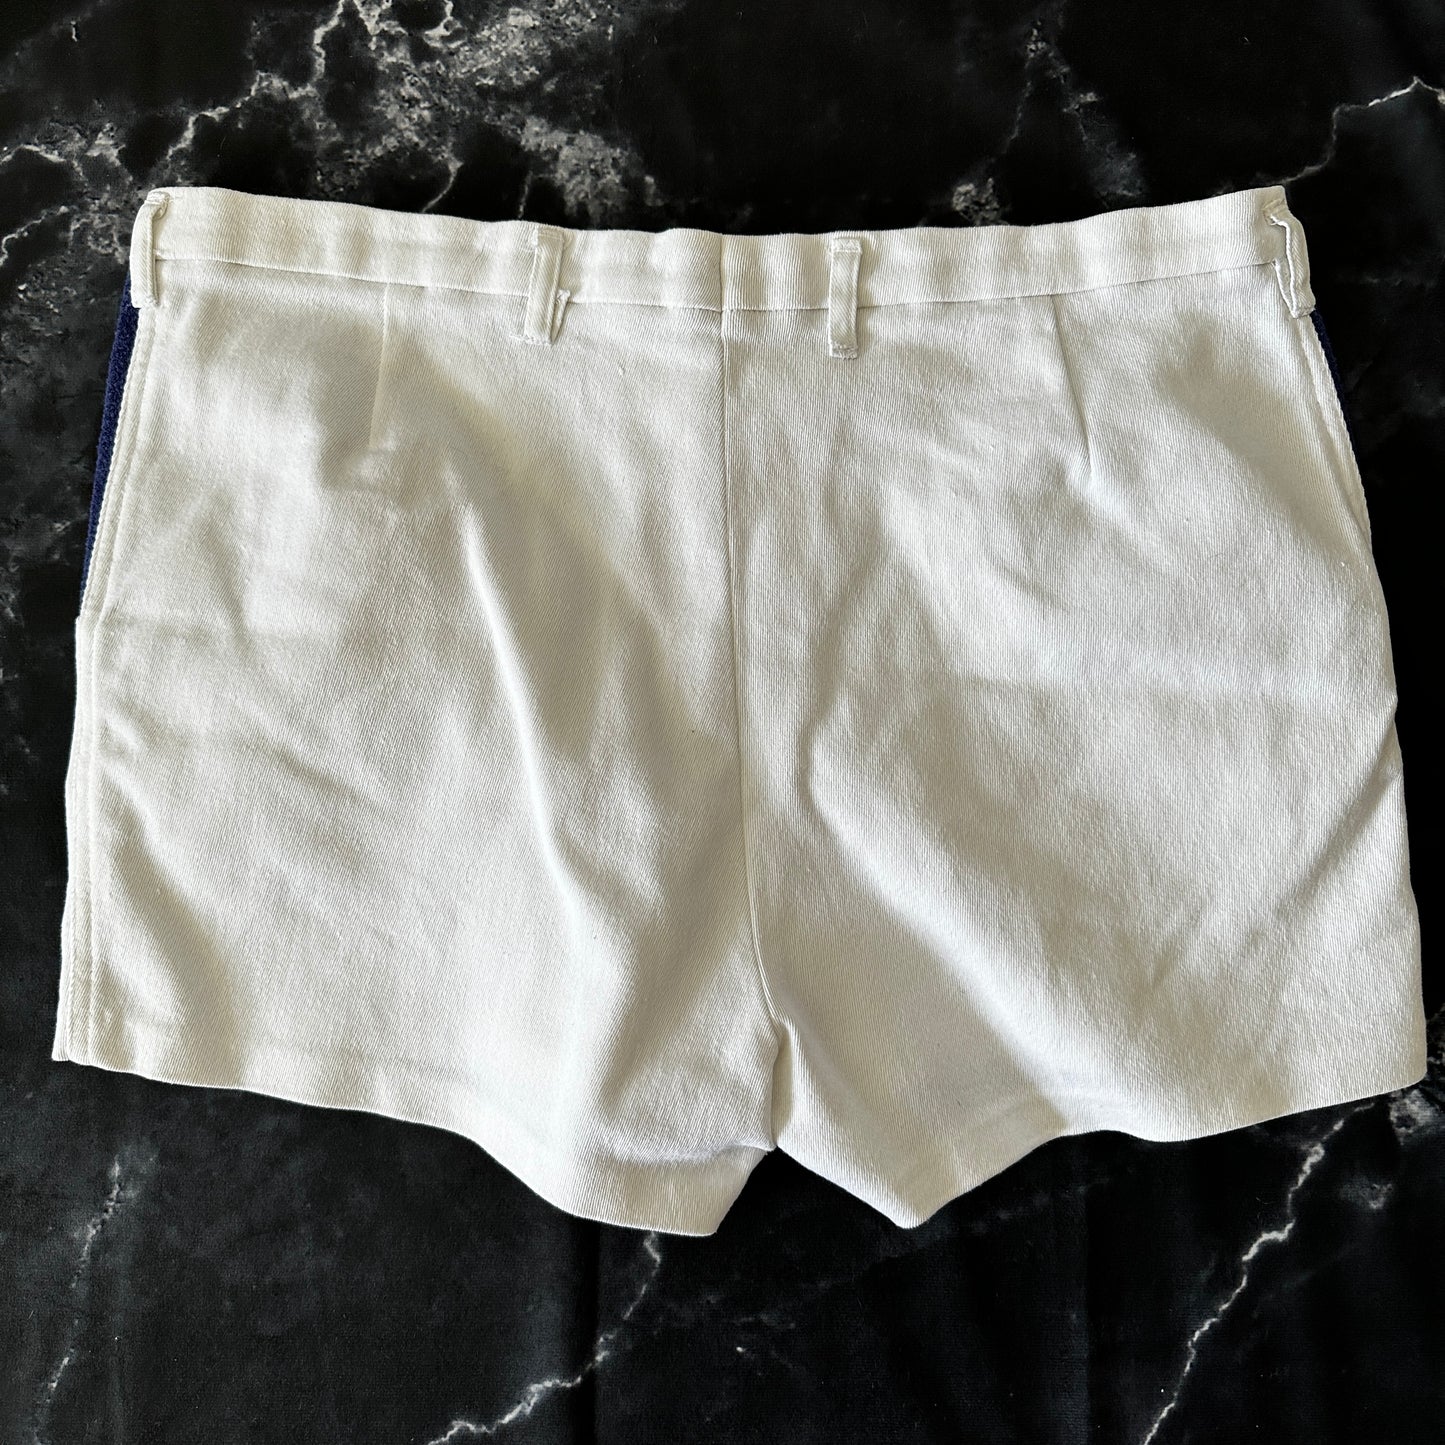 Elho Vintage 80s Tennis Shorts - White - 40 / L - Made in West Germany